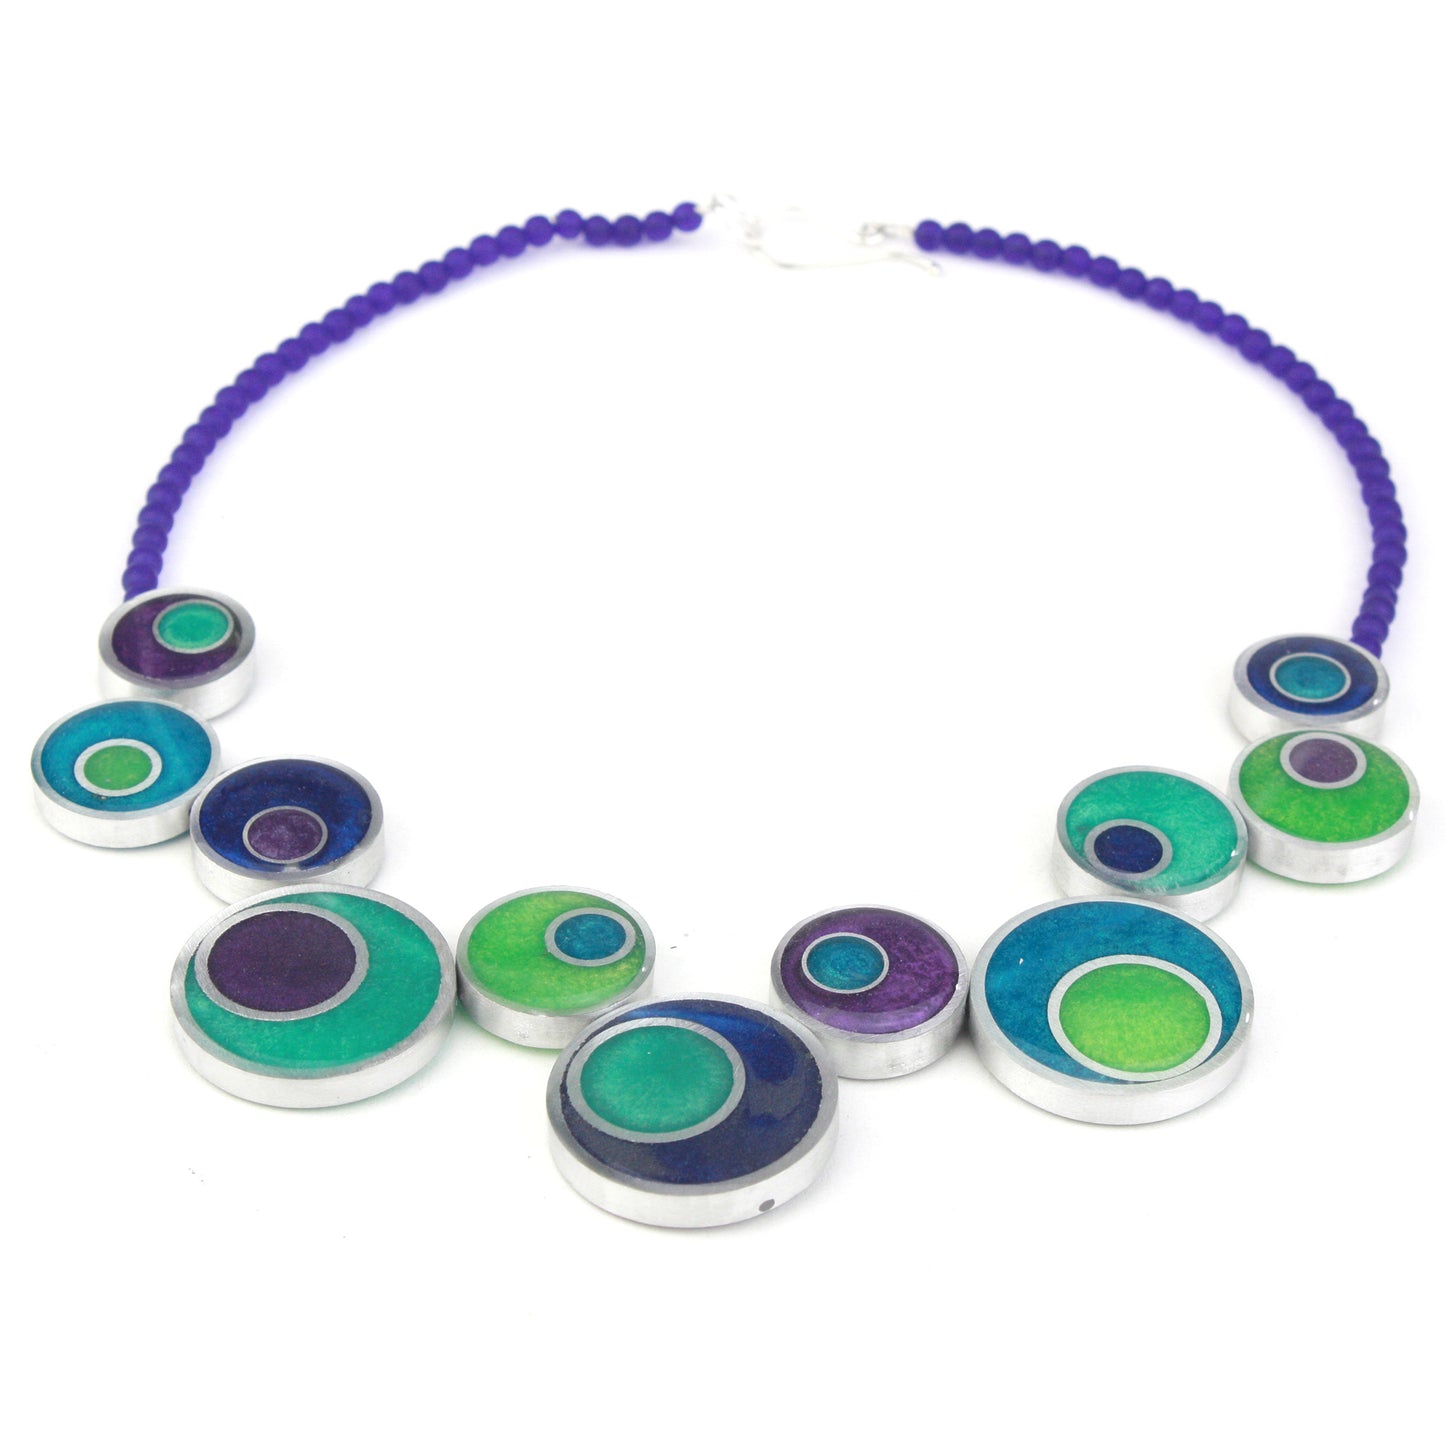 Resinique offset circle necklace - Blues and greens